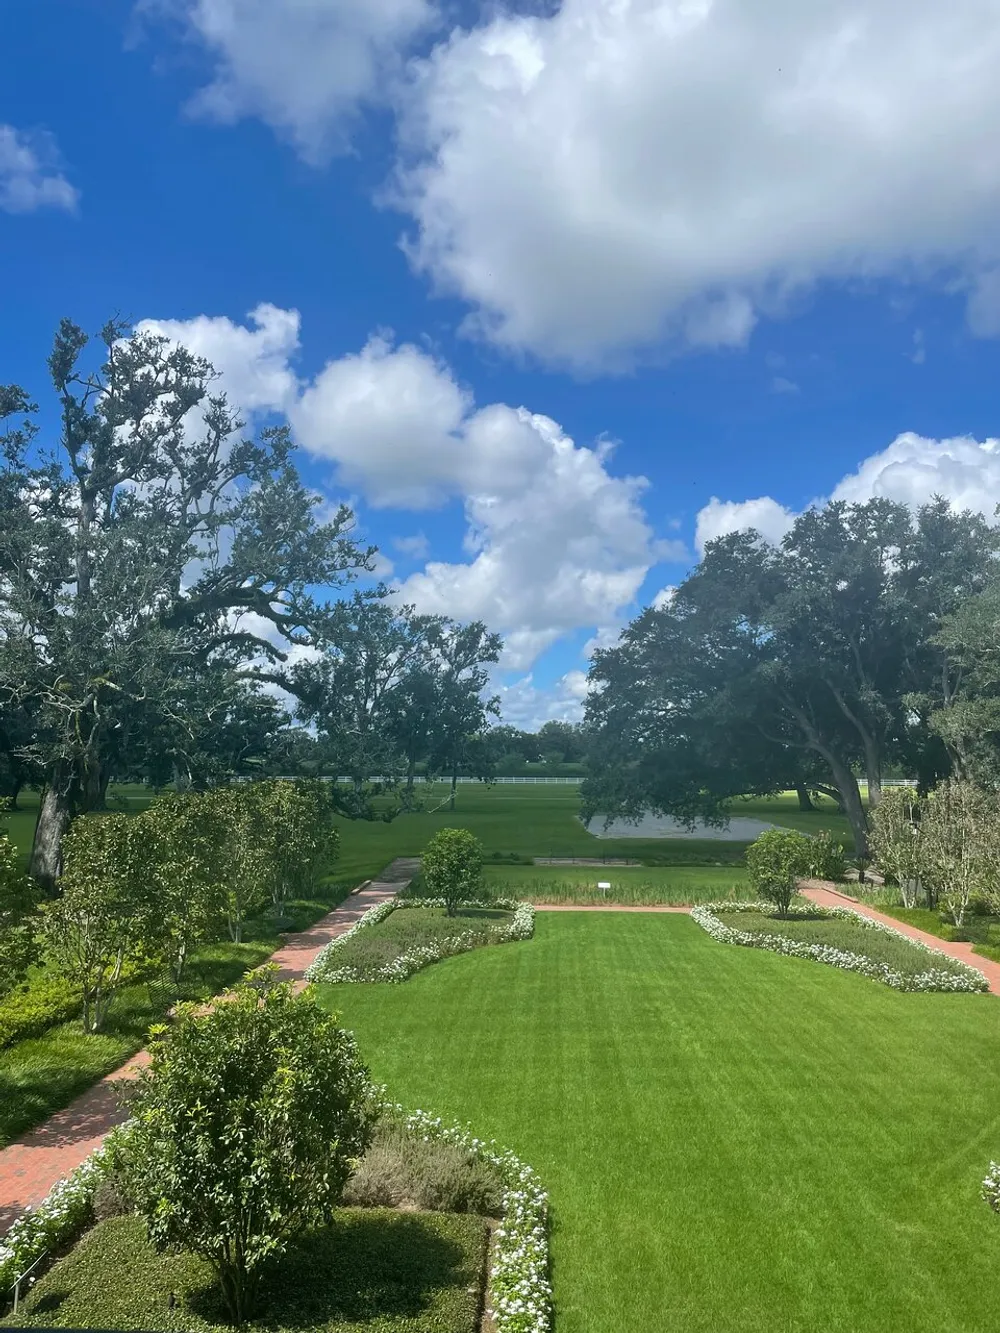 The image shows a well-maintained garden with manicured lawns bordered by neatly trimmed hedges and trees with a brick pathway leading towards a water body under a bright blue sky scattered with clouds